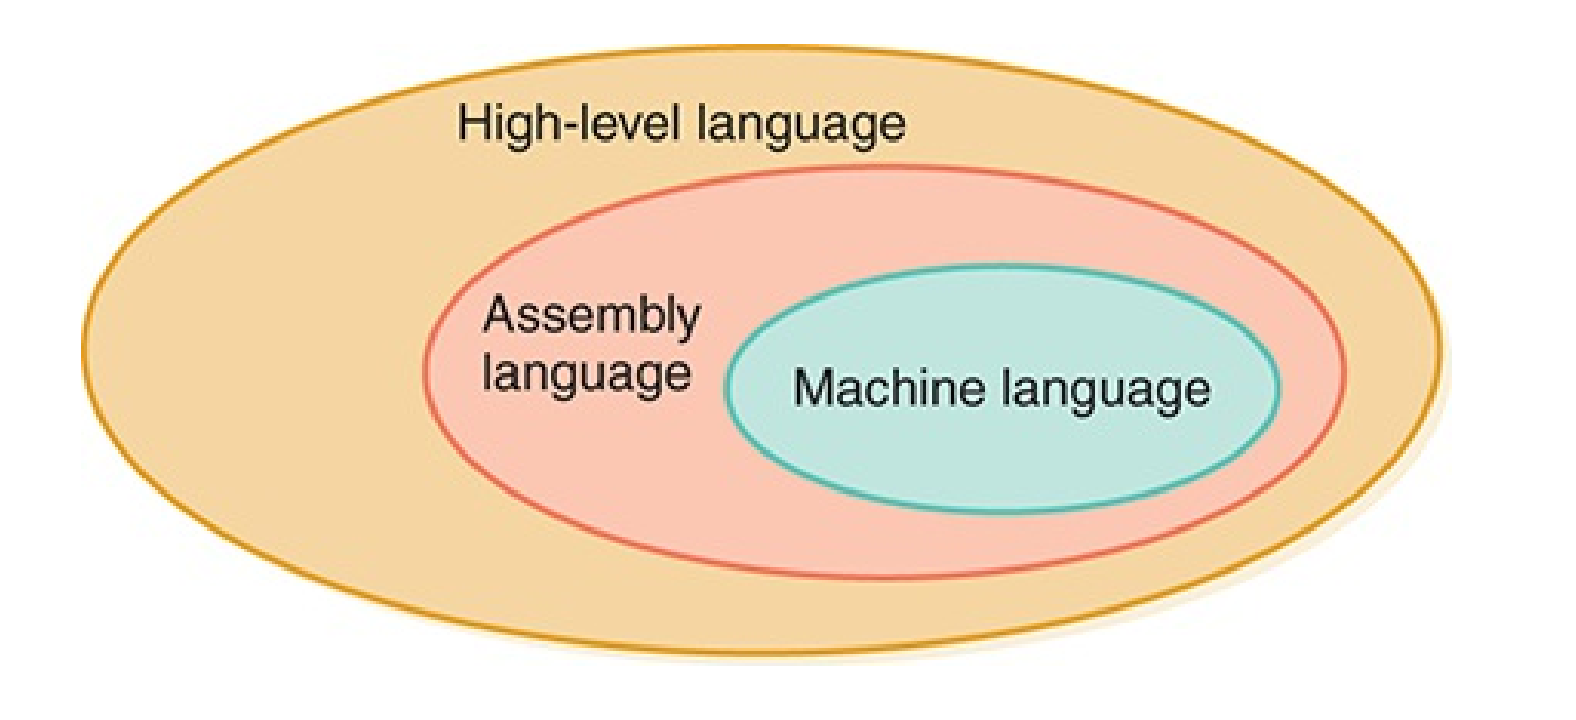 FIGURE 1.9 Language layers in the second generation